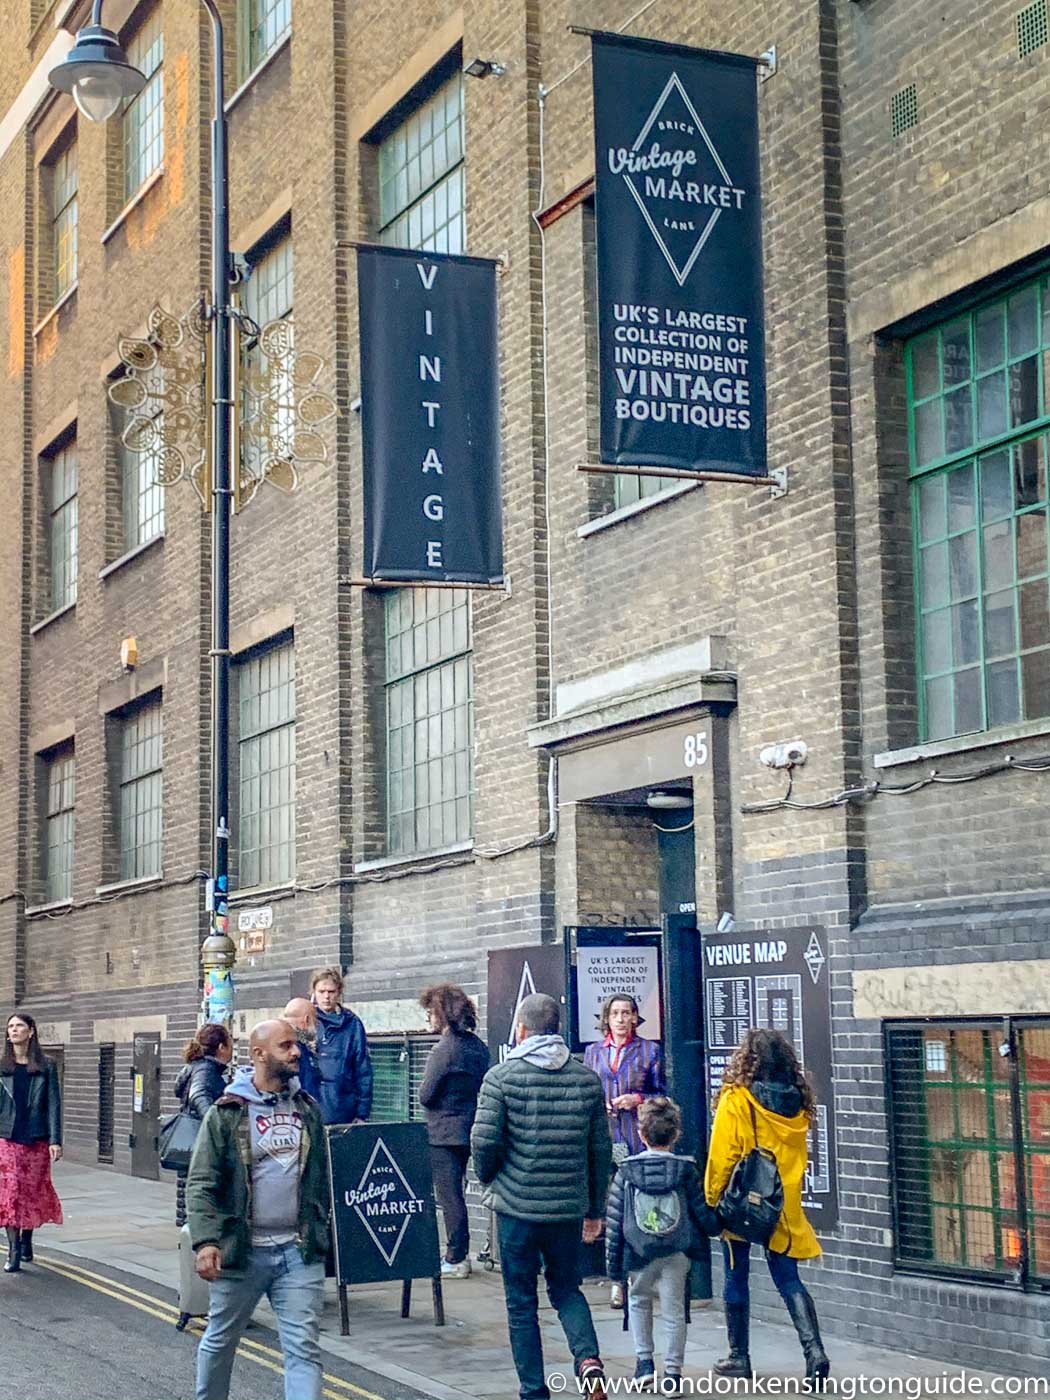 From longstanding vintage shops to interesting emporiums, here’s our guide on where to shop in London’s coolest neighbourhood, Shoreditch. Vintage Shops In Shoreditch | london thrift shops | vintage market brick lane | brick lane vintage market | vintage shops brick lane | vintage shops on brick lane | vintage shopping in east london | shoreditch vintage market | east london vintage shops | brick lane vintage | vintage stores shoreditch